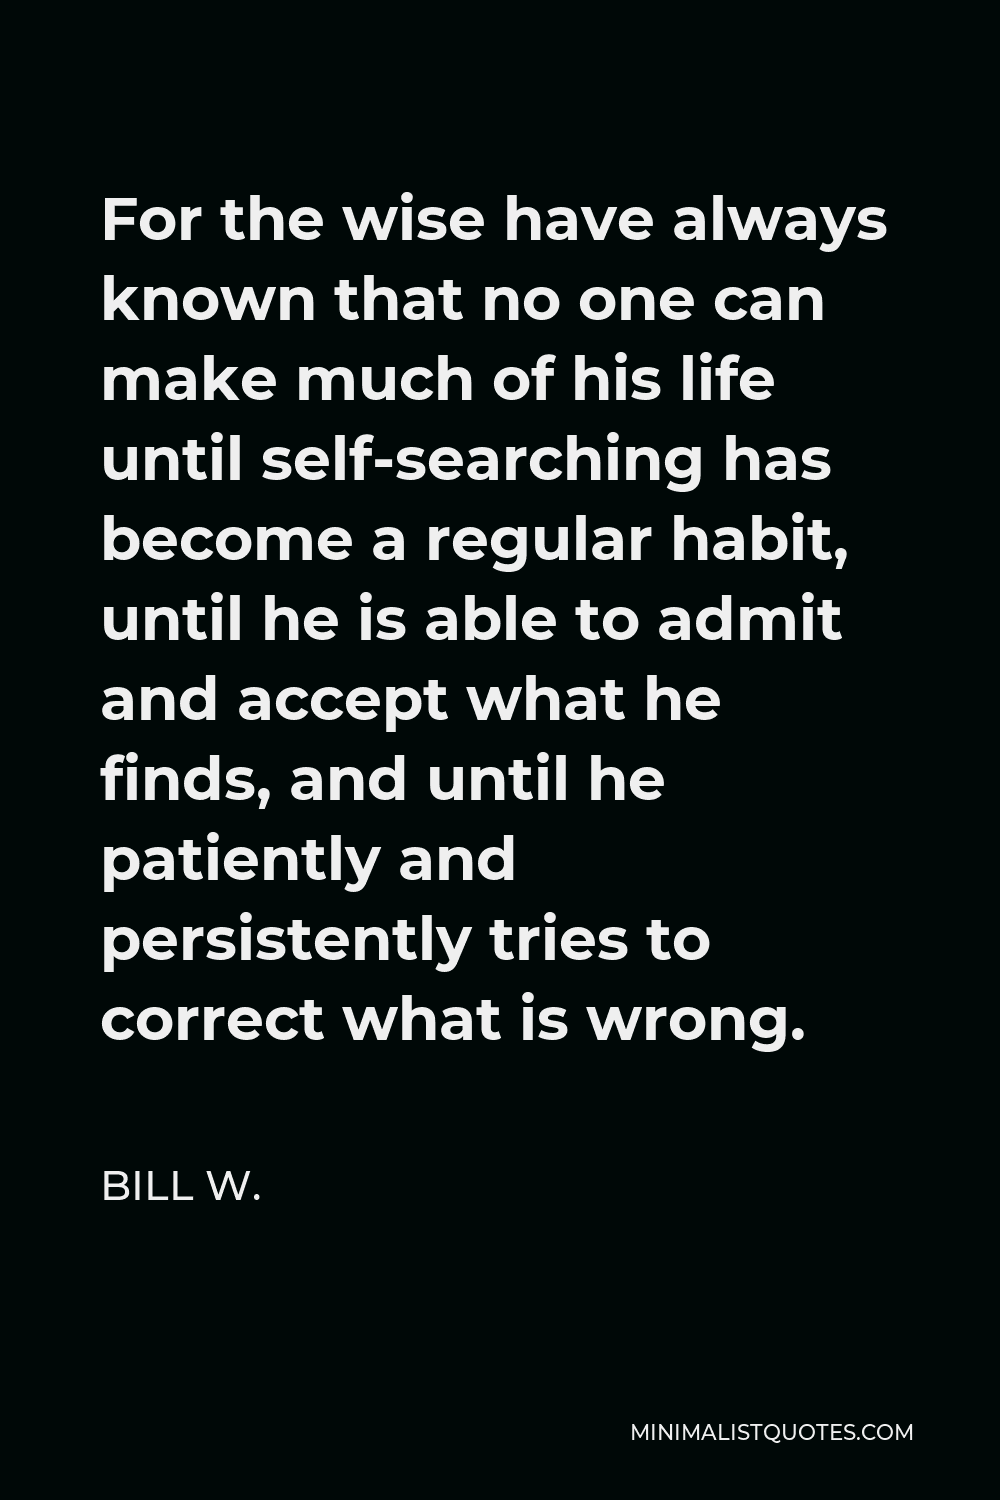 Bill W. Quote - For the wise have always known that no one can make much of his life until self-searching has become a regular habit, until he is able to admit and accept what he finds, and until he patiently and persistently tries to correct what is wrong.